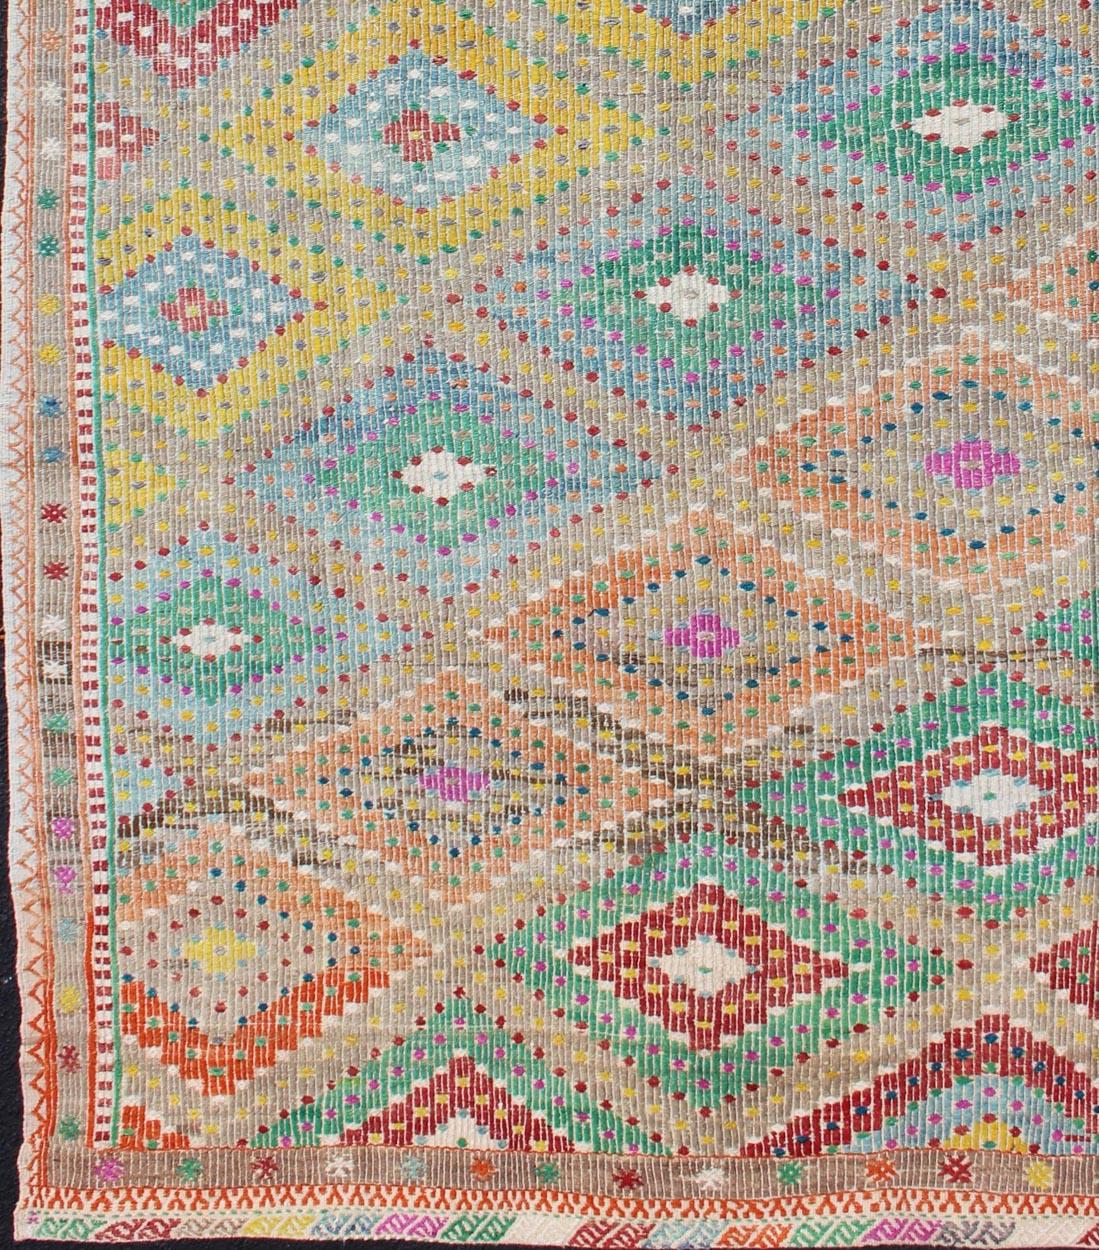 Diamond design Turkish embroidered Kilim vintage rug in Vivid colors
Colorful flat-woven embroidered Kilim rug from Turkey, rug en-179666,
country of origin / type: Turkey / Kilim, circa 1970

This flat-woven Embroidered flat weave rug is